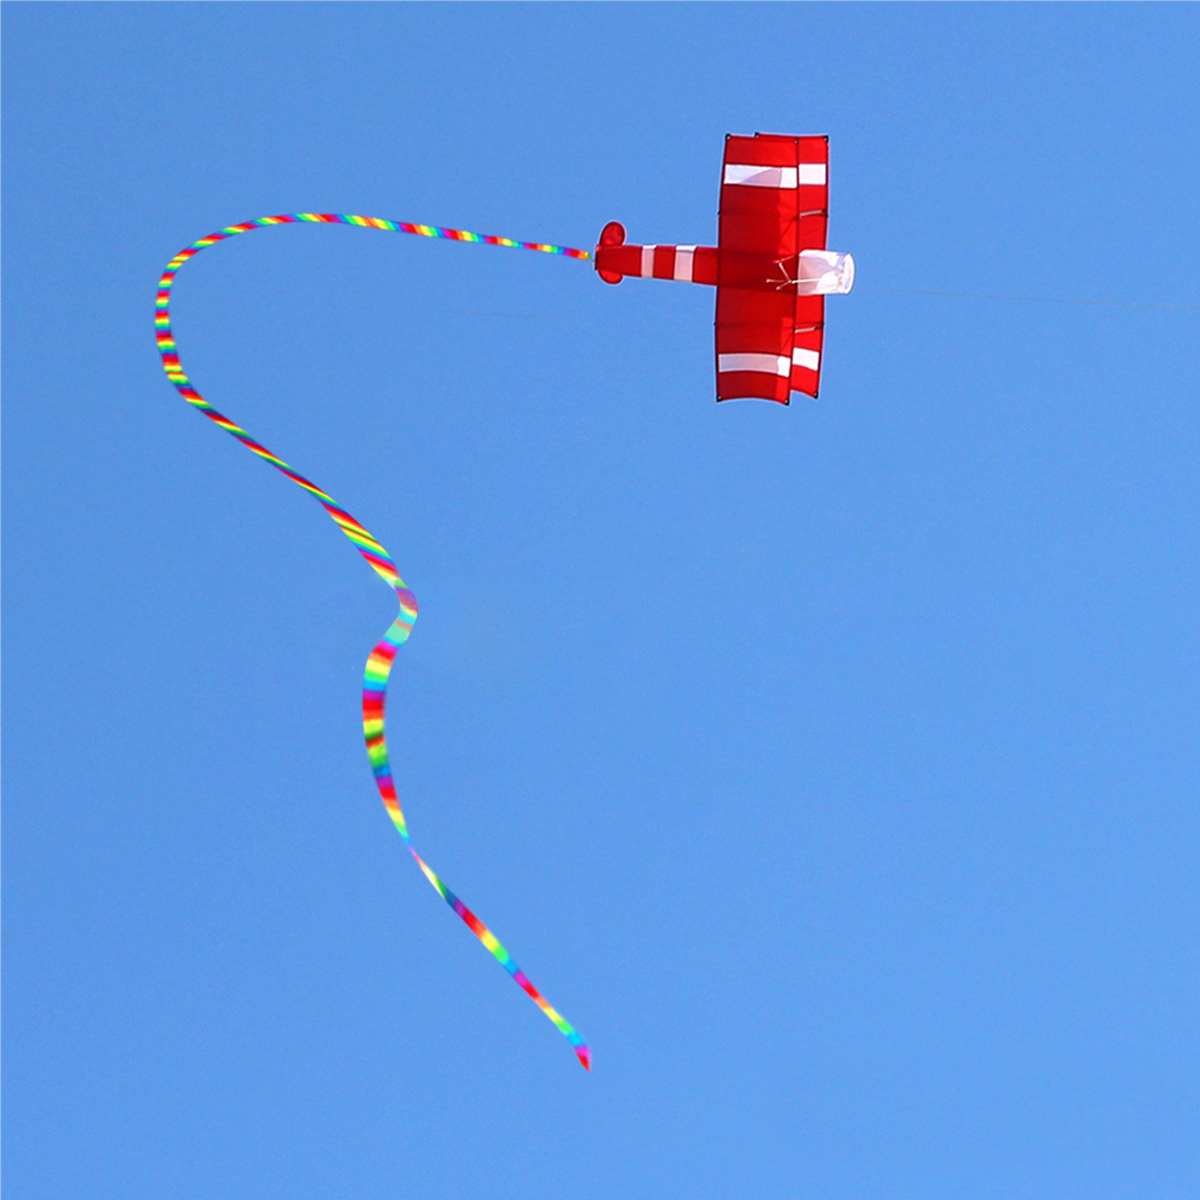 New High Quality 3D Single Line Red Yellow Kites Sports Beach With Kite Handle and String Easy to Fly